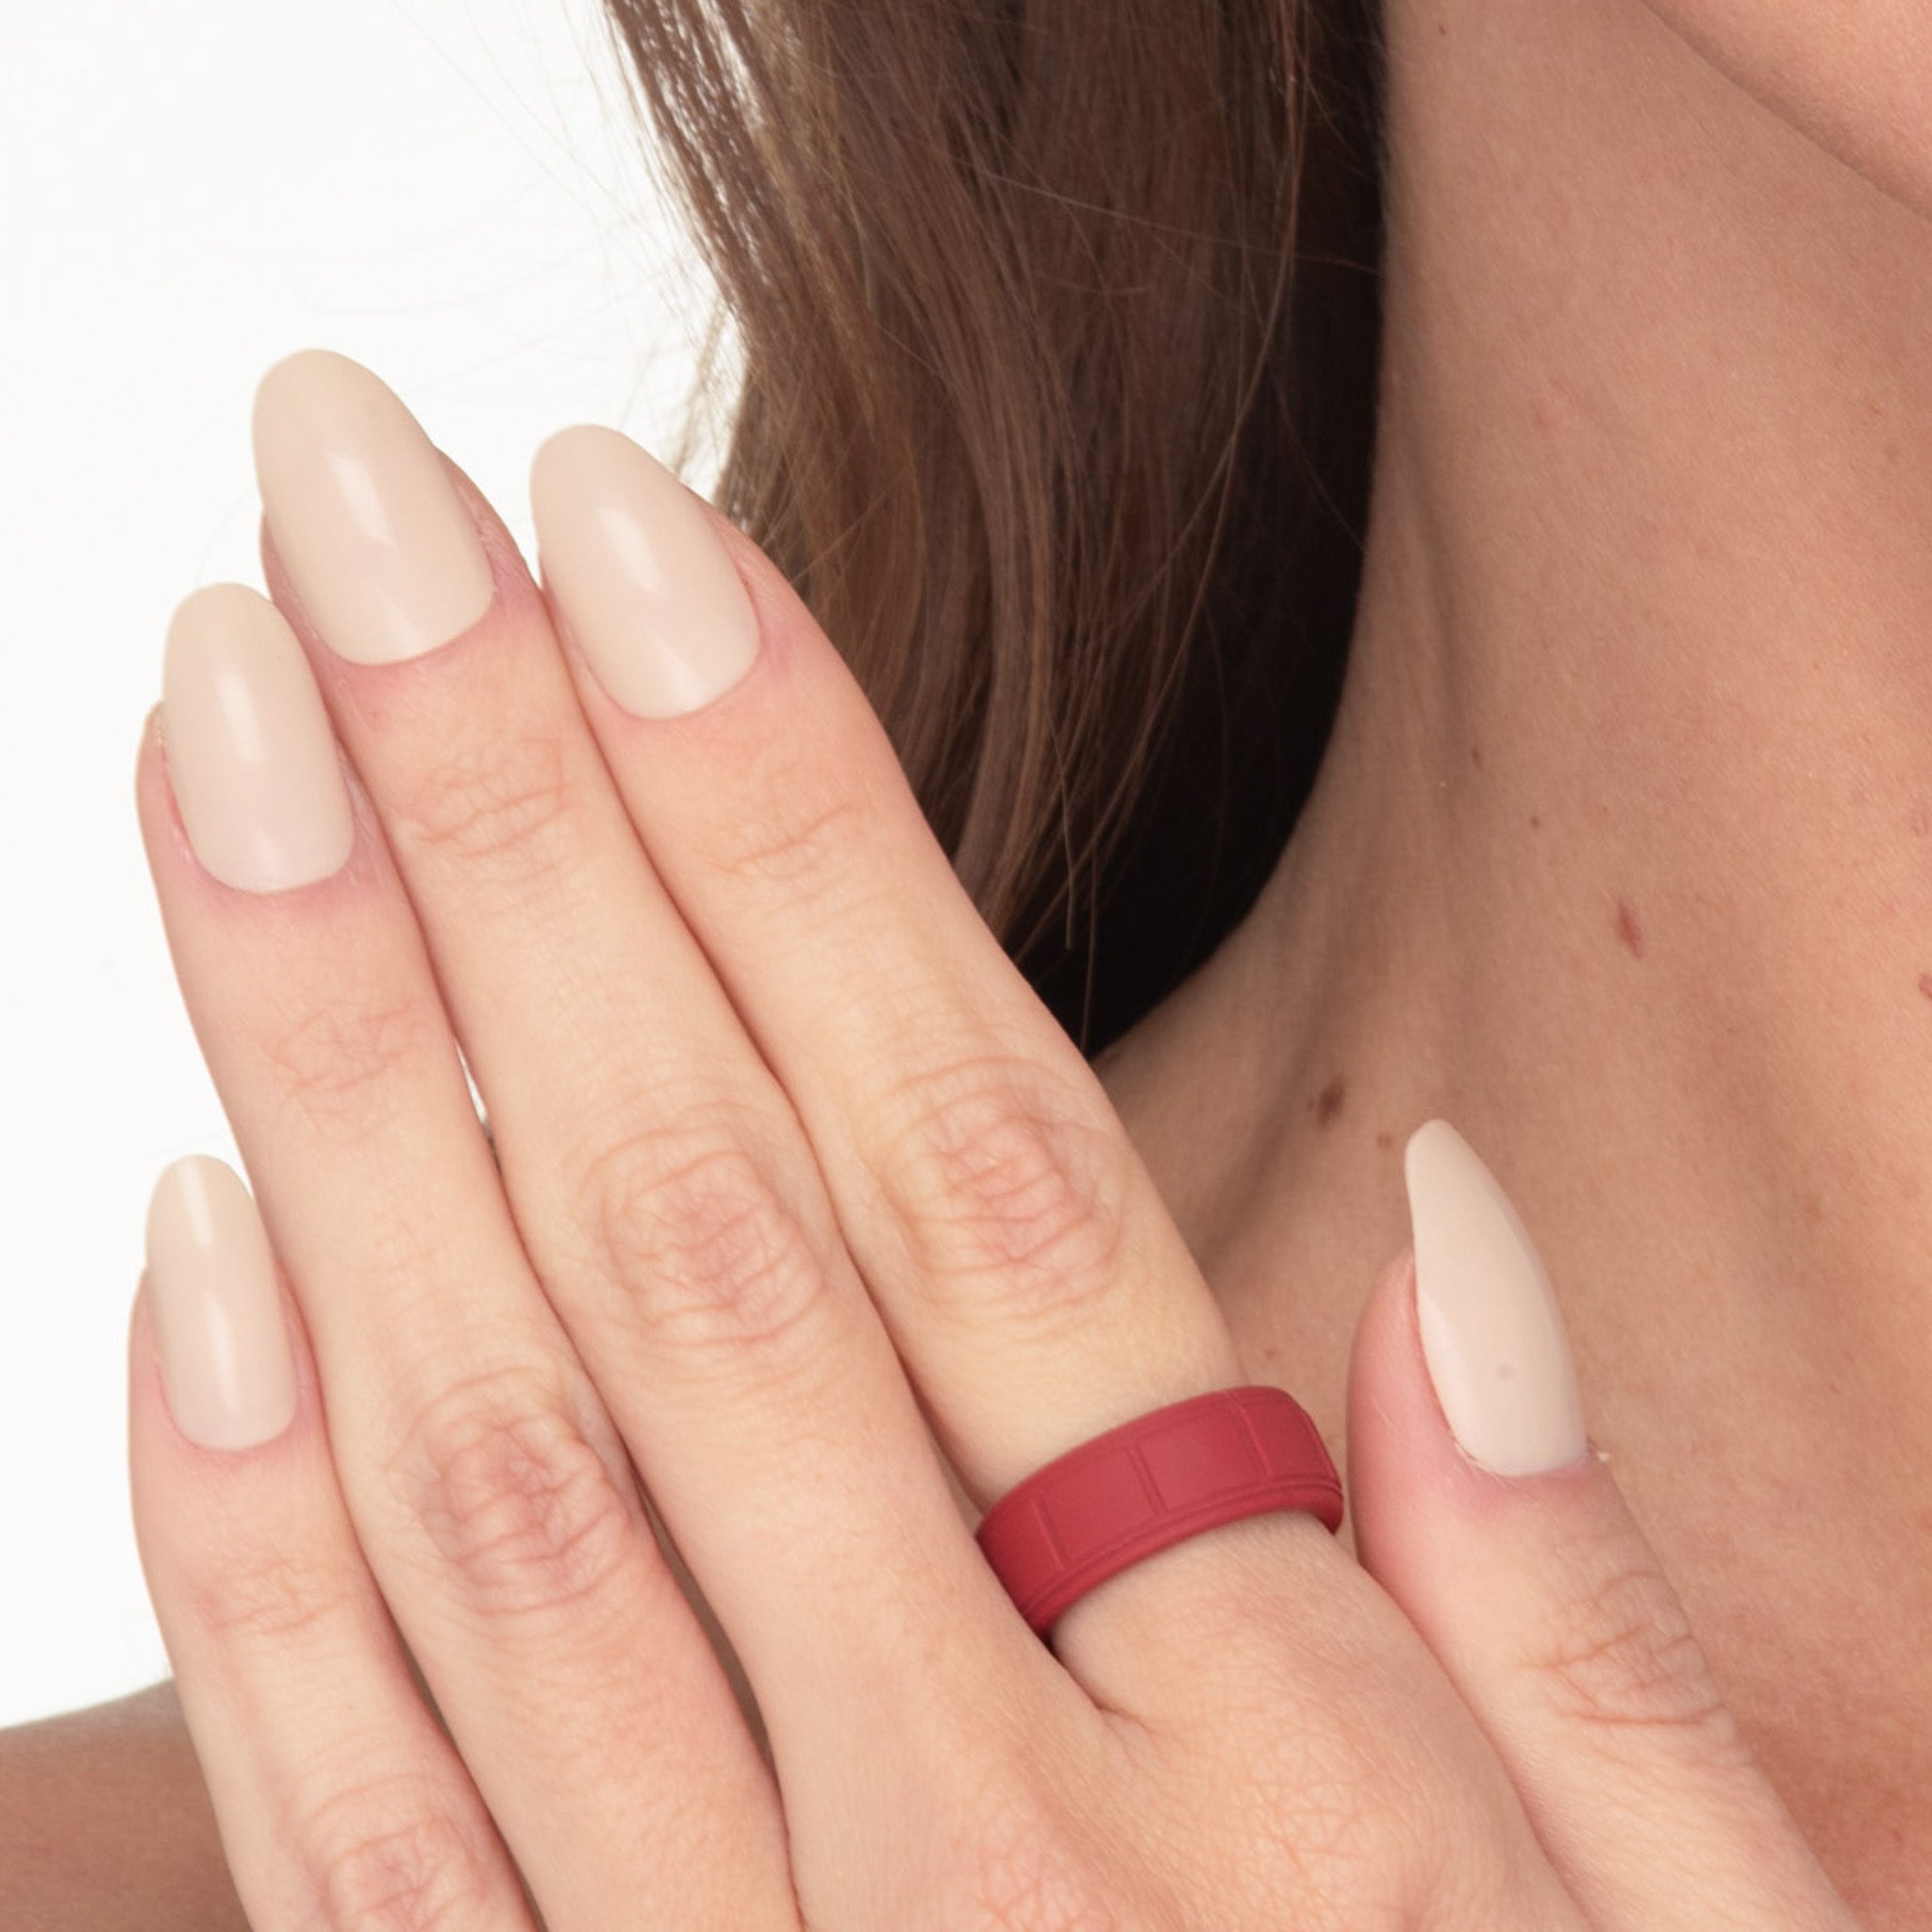 The Wine - Silicone Ring